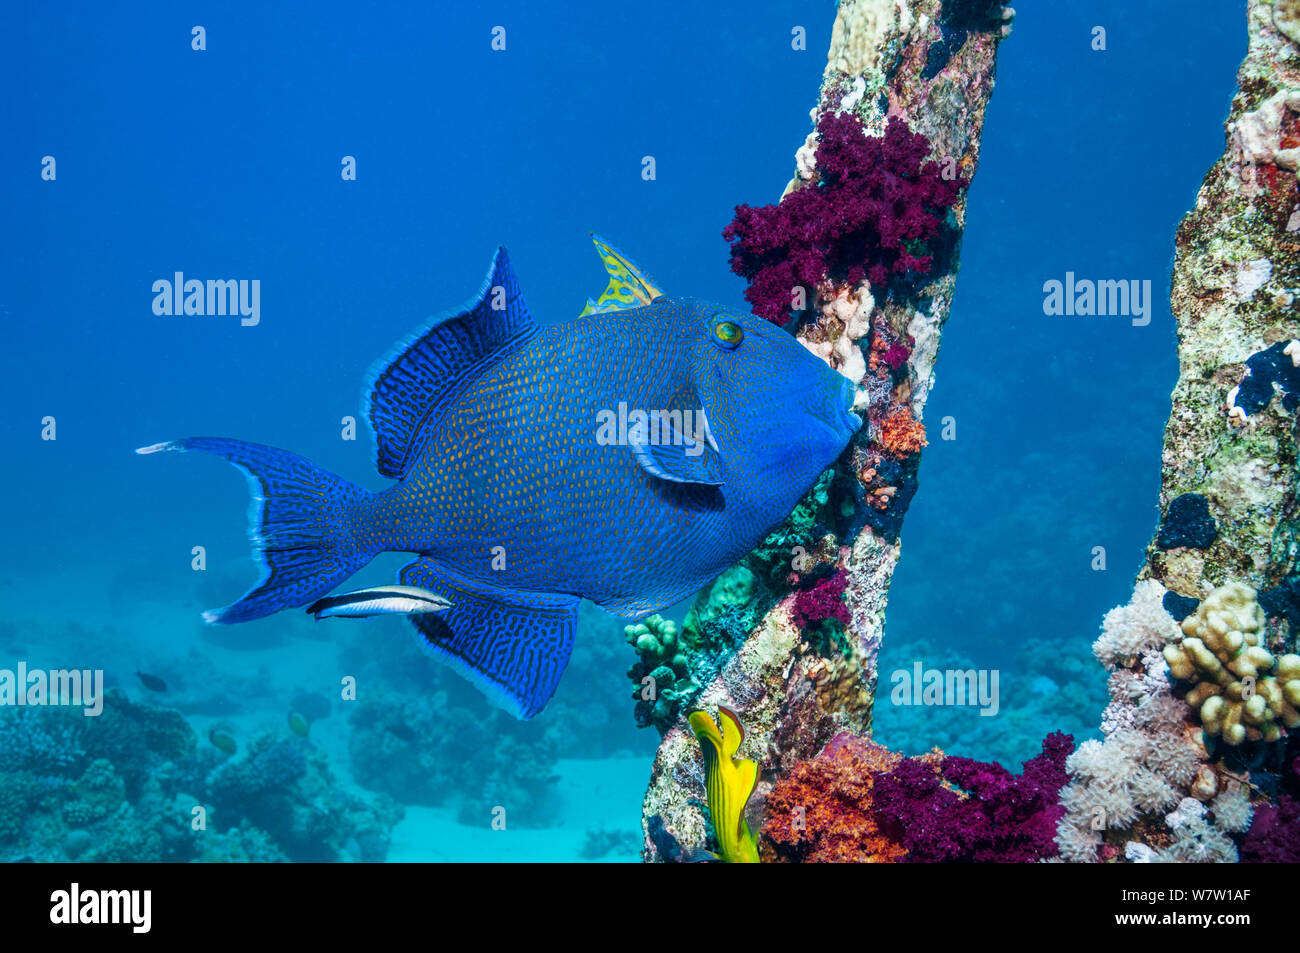 Blue triggerfish (Pseudobalistes fuscus) with a Bluestreak cleaner wrasse.  Egypt, Red Sea. Stock Photo